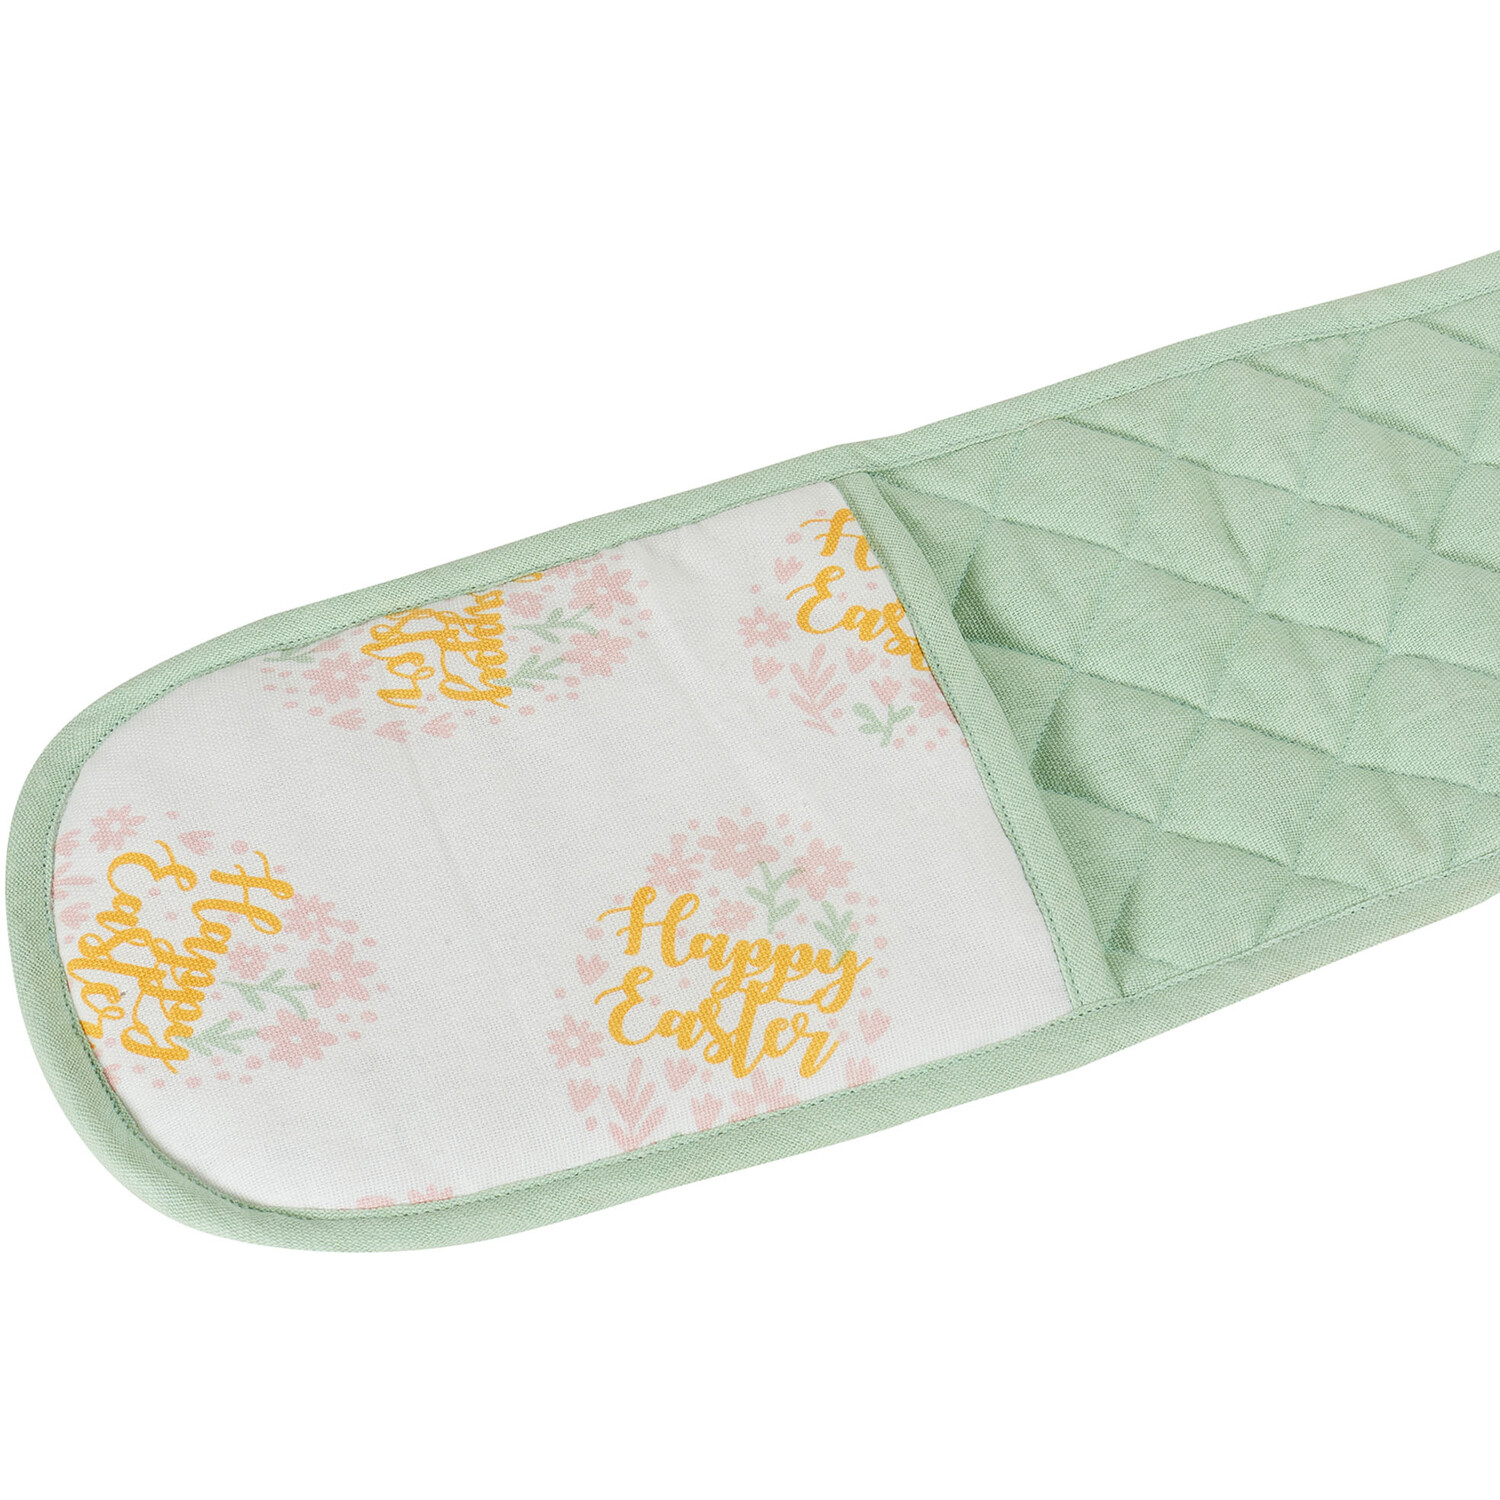 Happy Easter Double Oven Gloves - Green Image 4